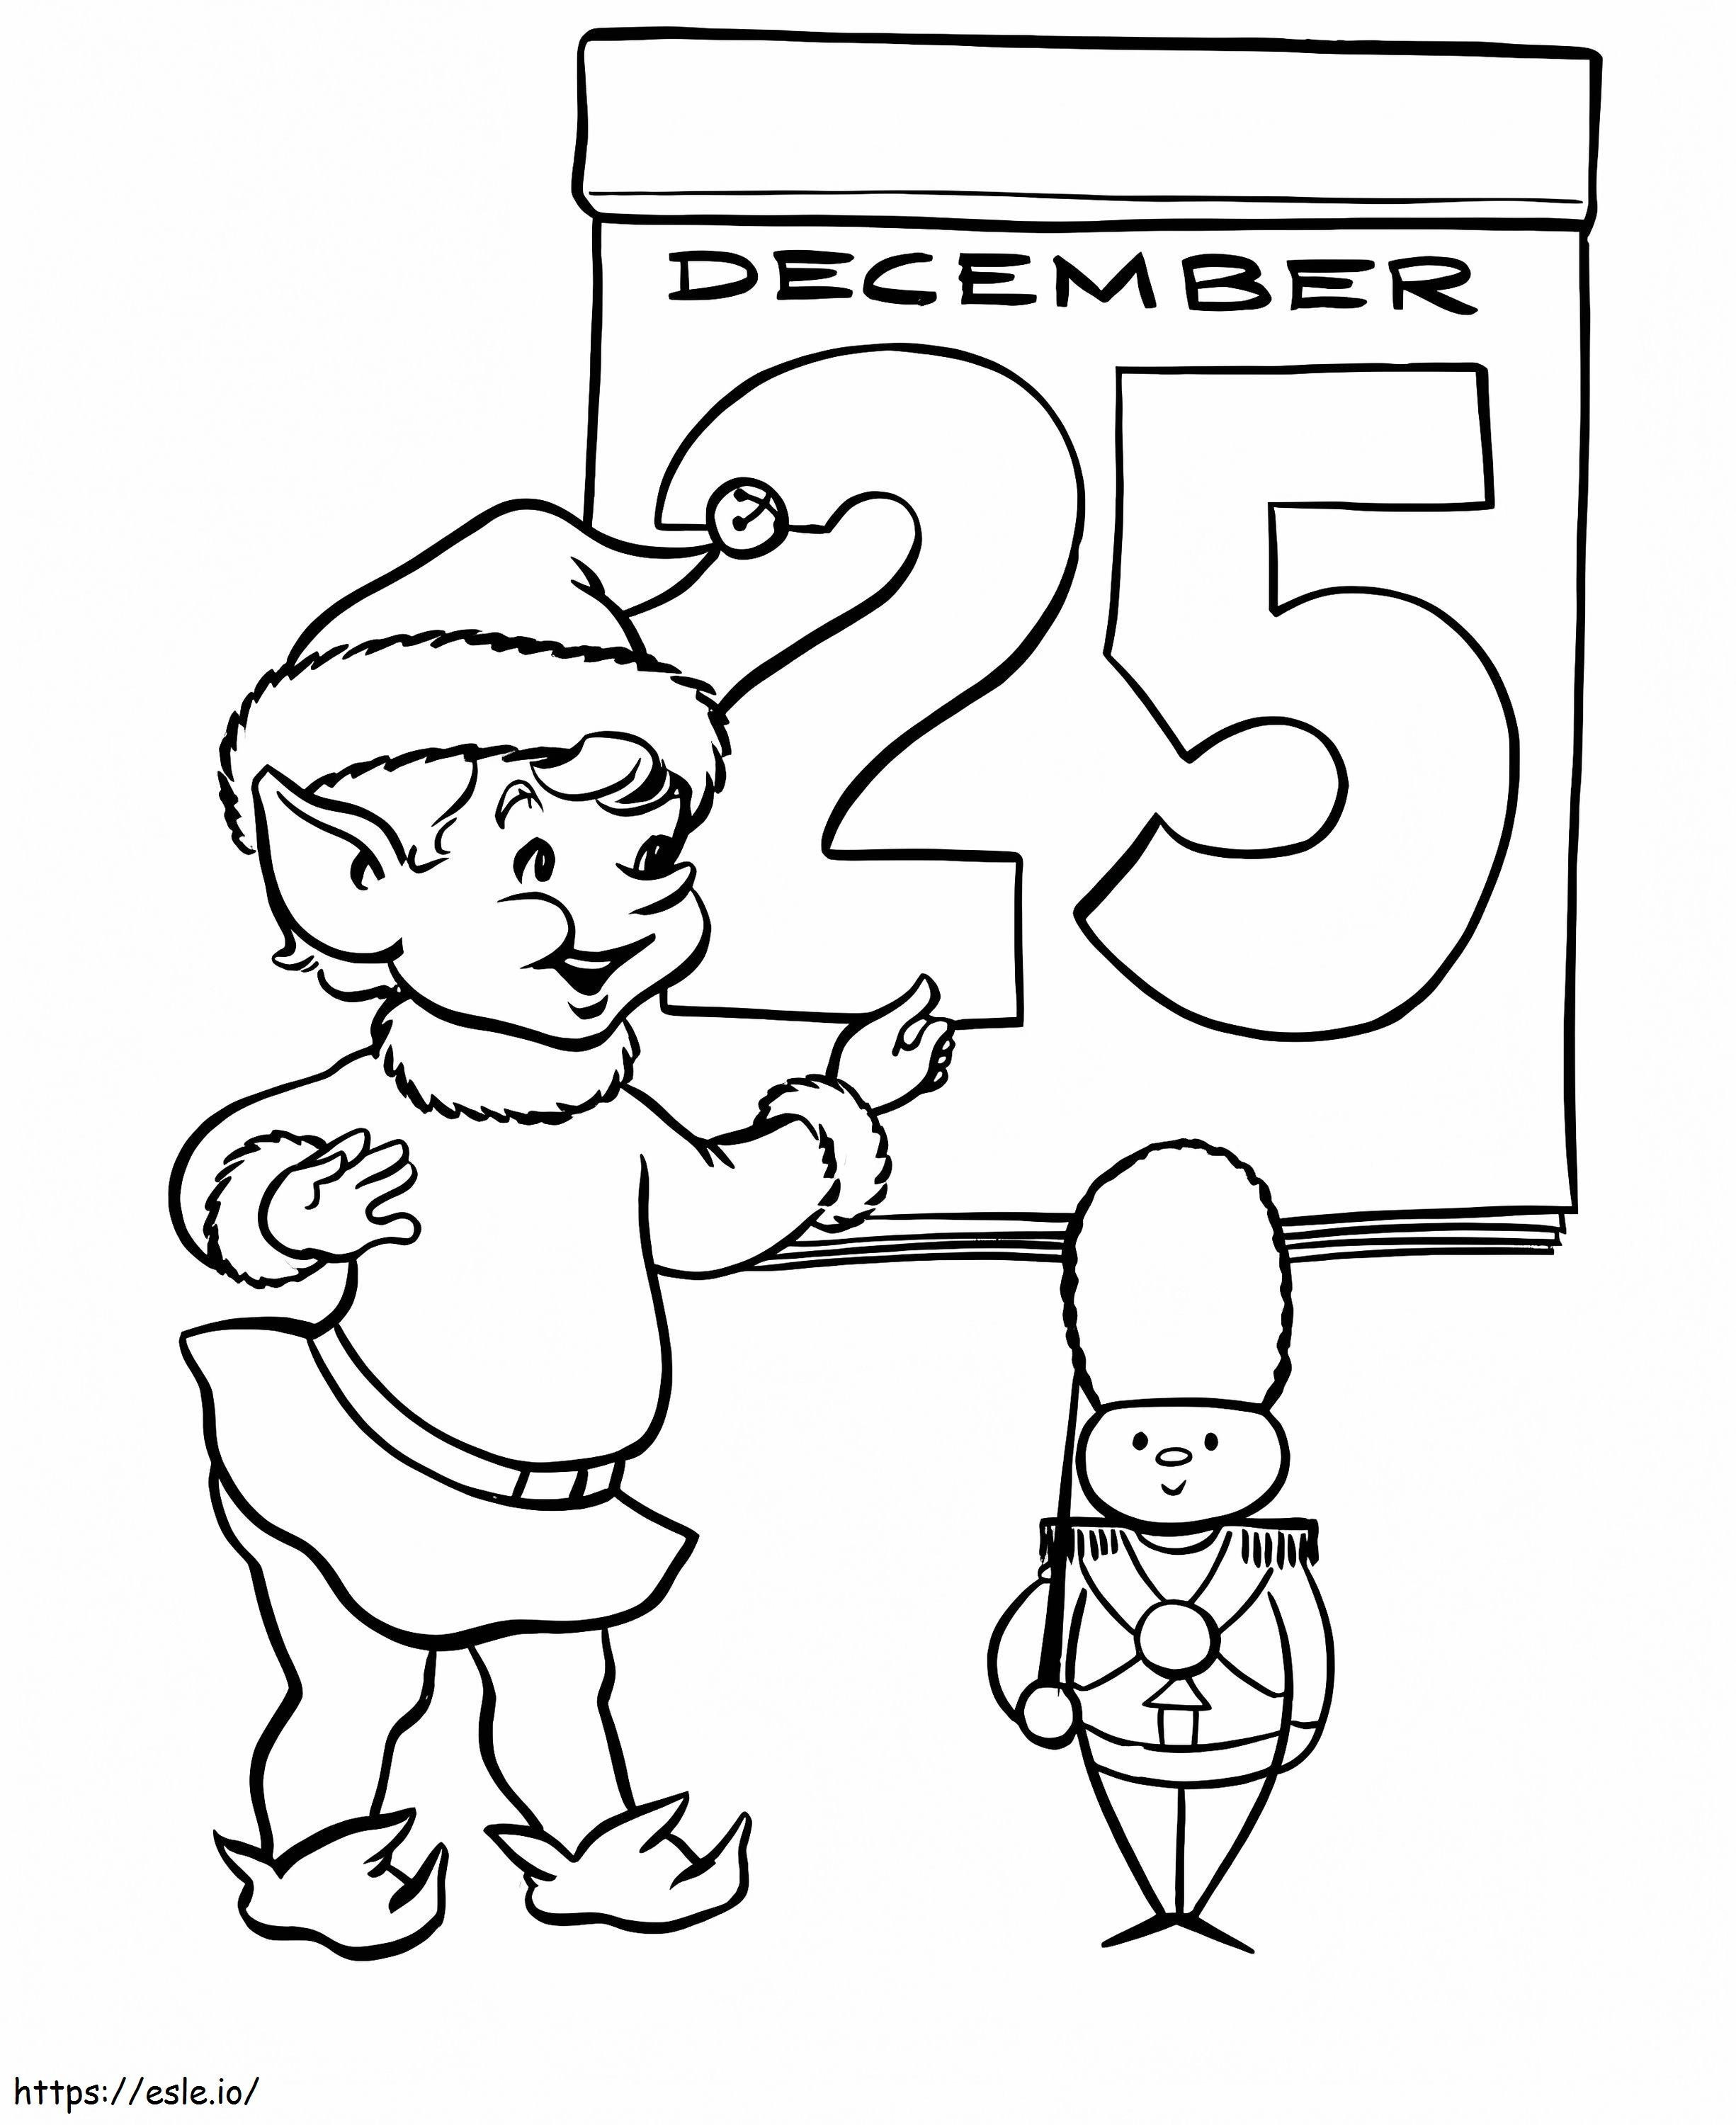 25 December coloring page